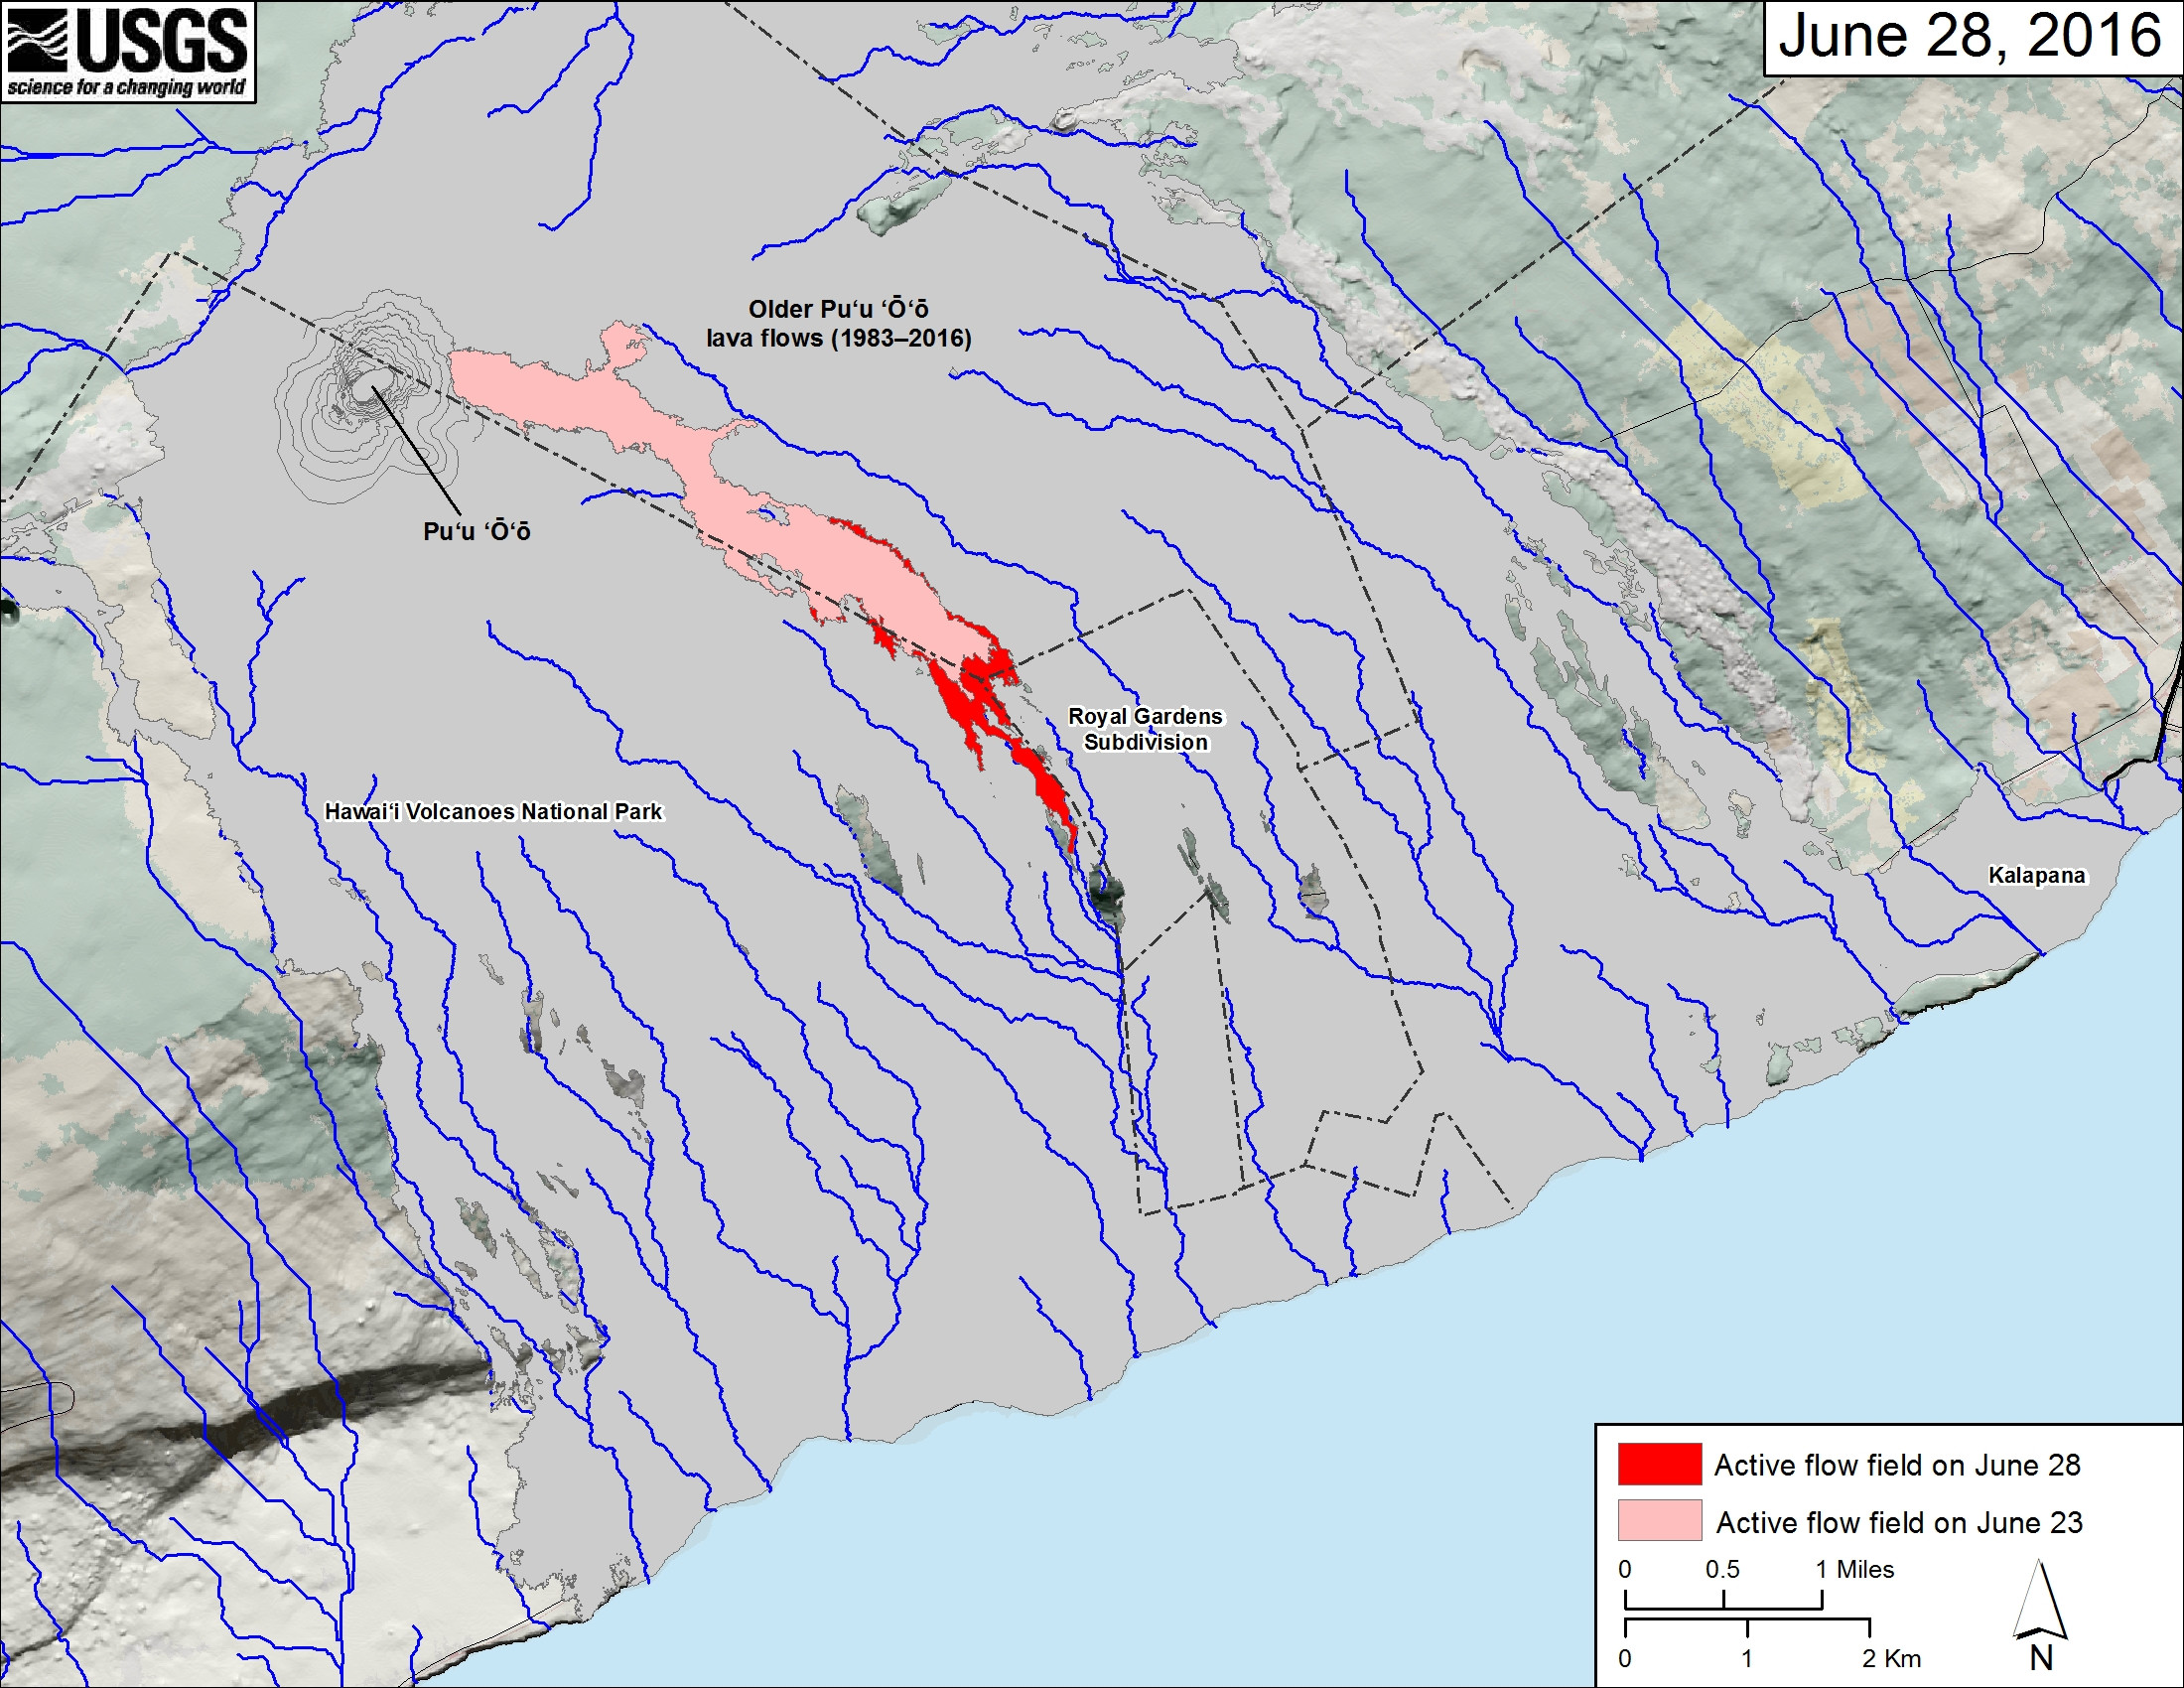 (USGS map) This small-scale map shows Kīlauea’s active East Rift Zone lava flow field in relation to the southeastern part of the Island of Hawaiʻi. The area of the active flow field on June 23 is shown in pink, while widening and advancement of the active flow field as mapped on June 28 is shown in red. Older Puʻu ʻŌʻō lava flows (1983–2016) are shown in gray.